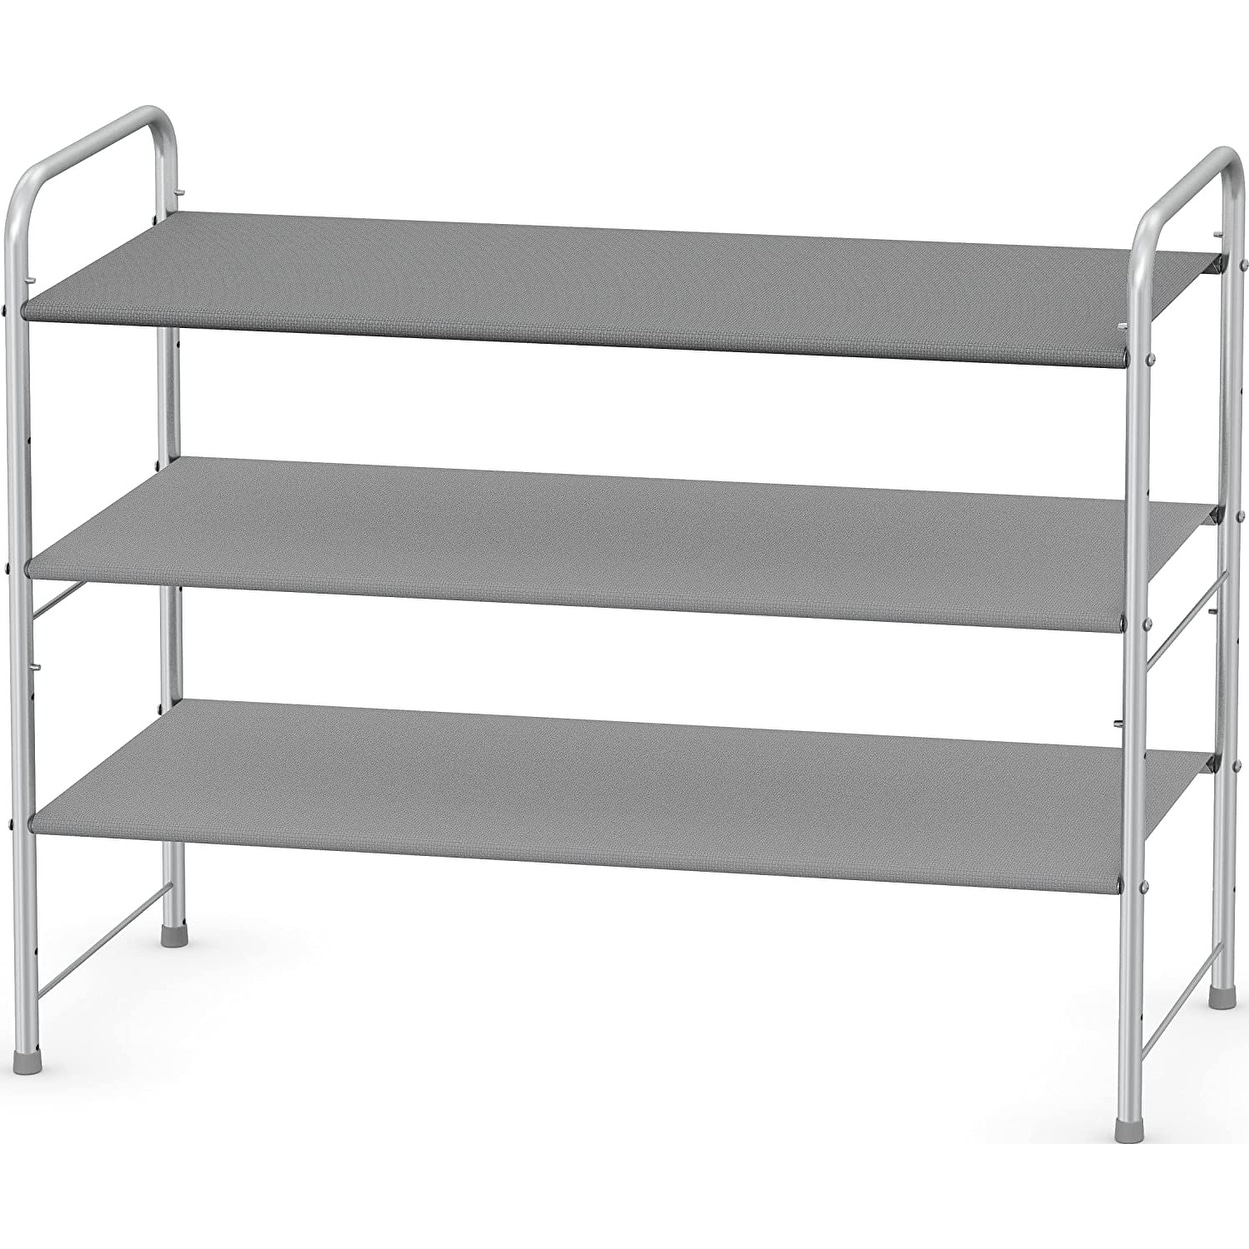 https://ak1.ostkcdn.com/images/products/is/images/direct/89be7e0ef40f5e6686d57e9e3fd3a2c9ecaaf5ba/Simple-Houseware-3-Tier-Shoe-Rack-Storage-Organizer.jpg